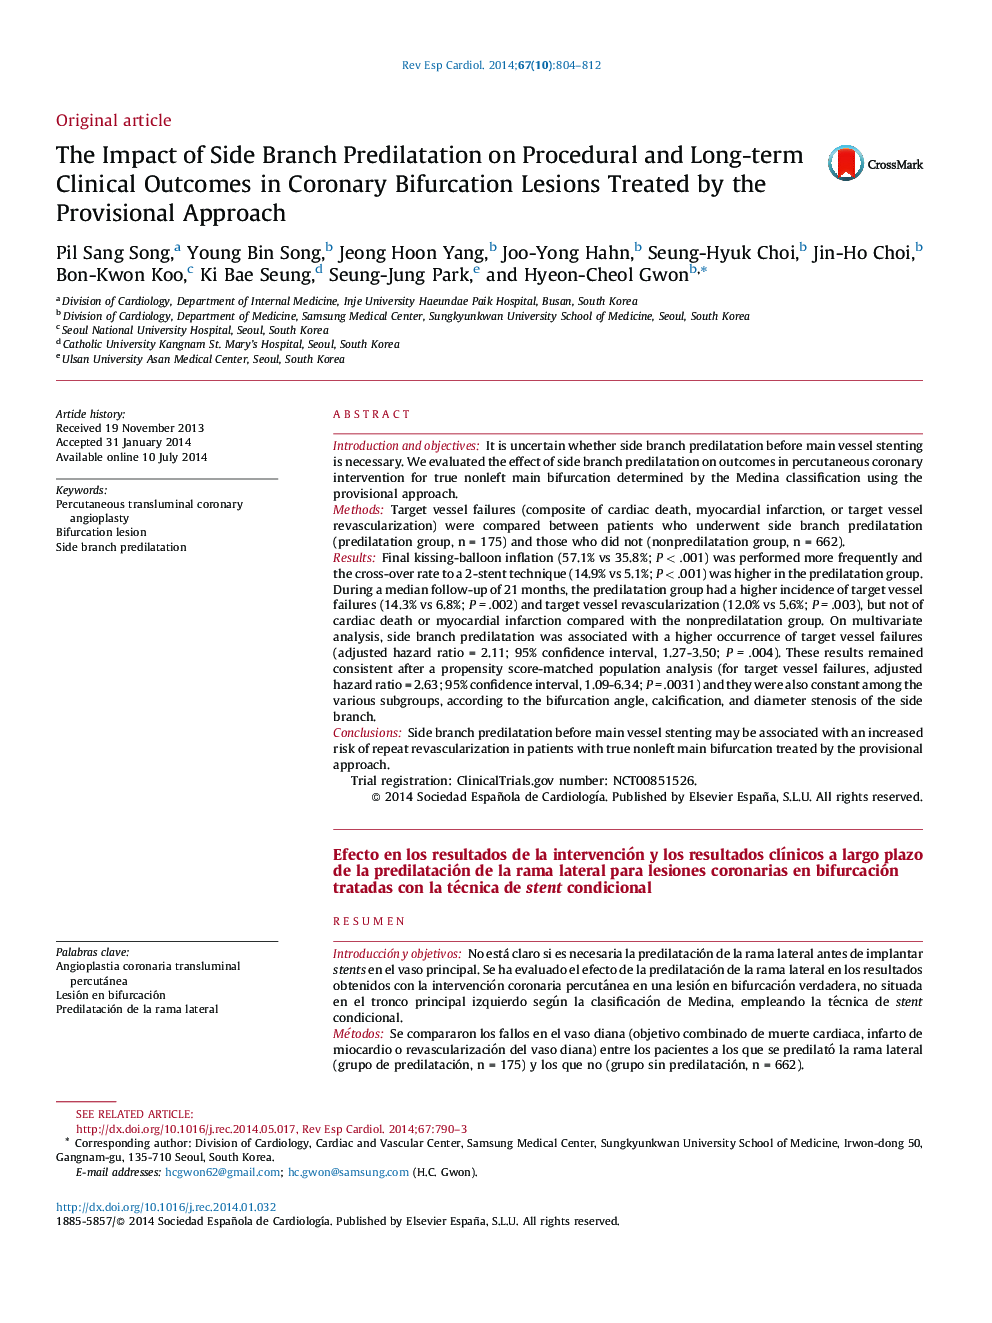 The Impact of Side Branch Predilatation on Procedural and Long-term Clinical Outcomes in Coronary Bifurcation Lesions Treated by the Provisional Approach